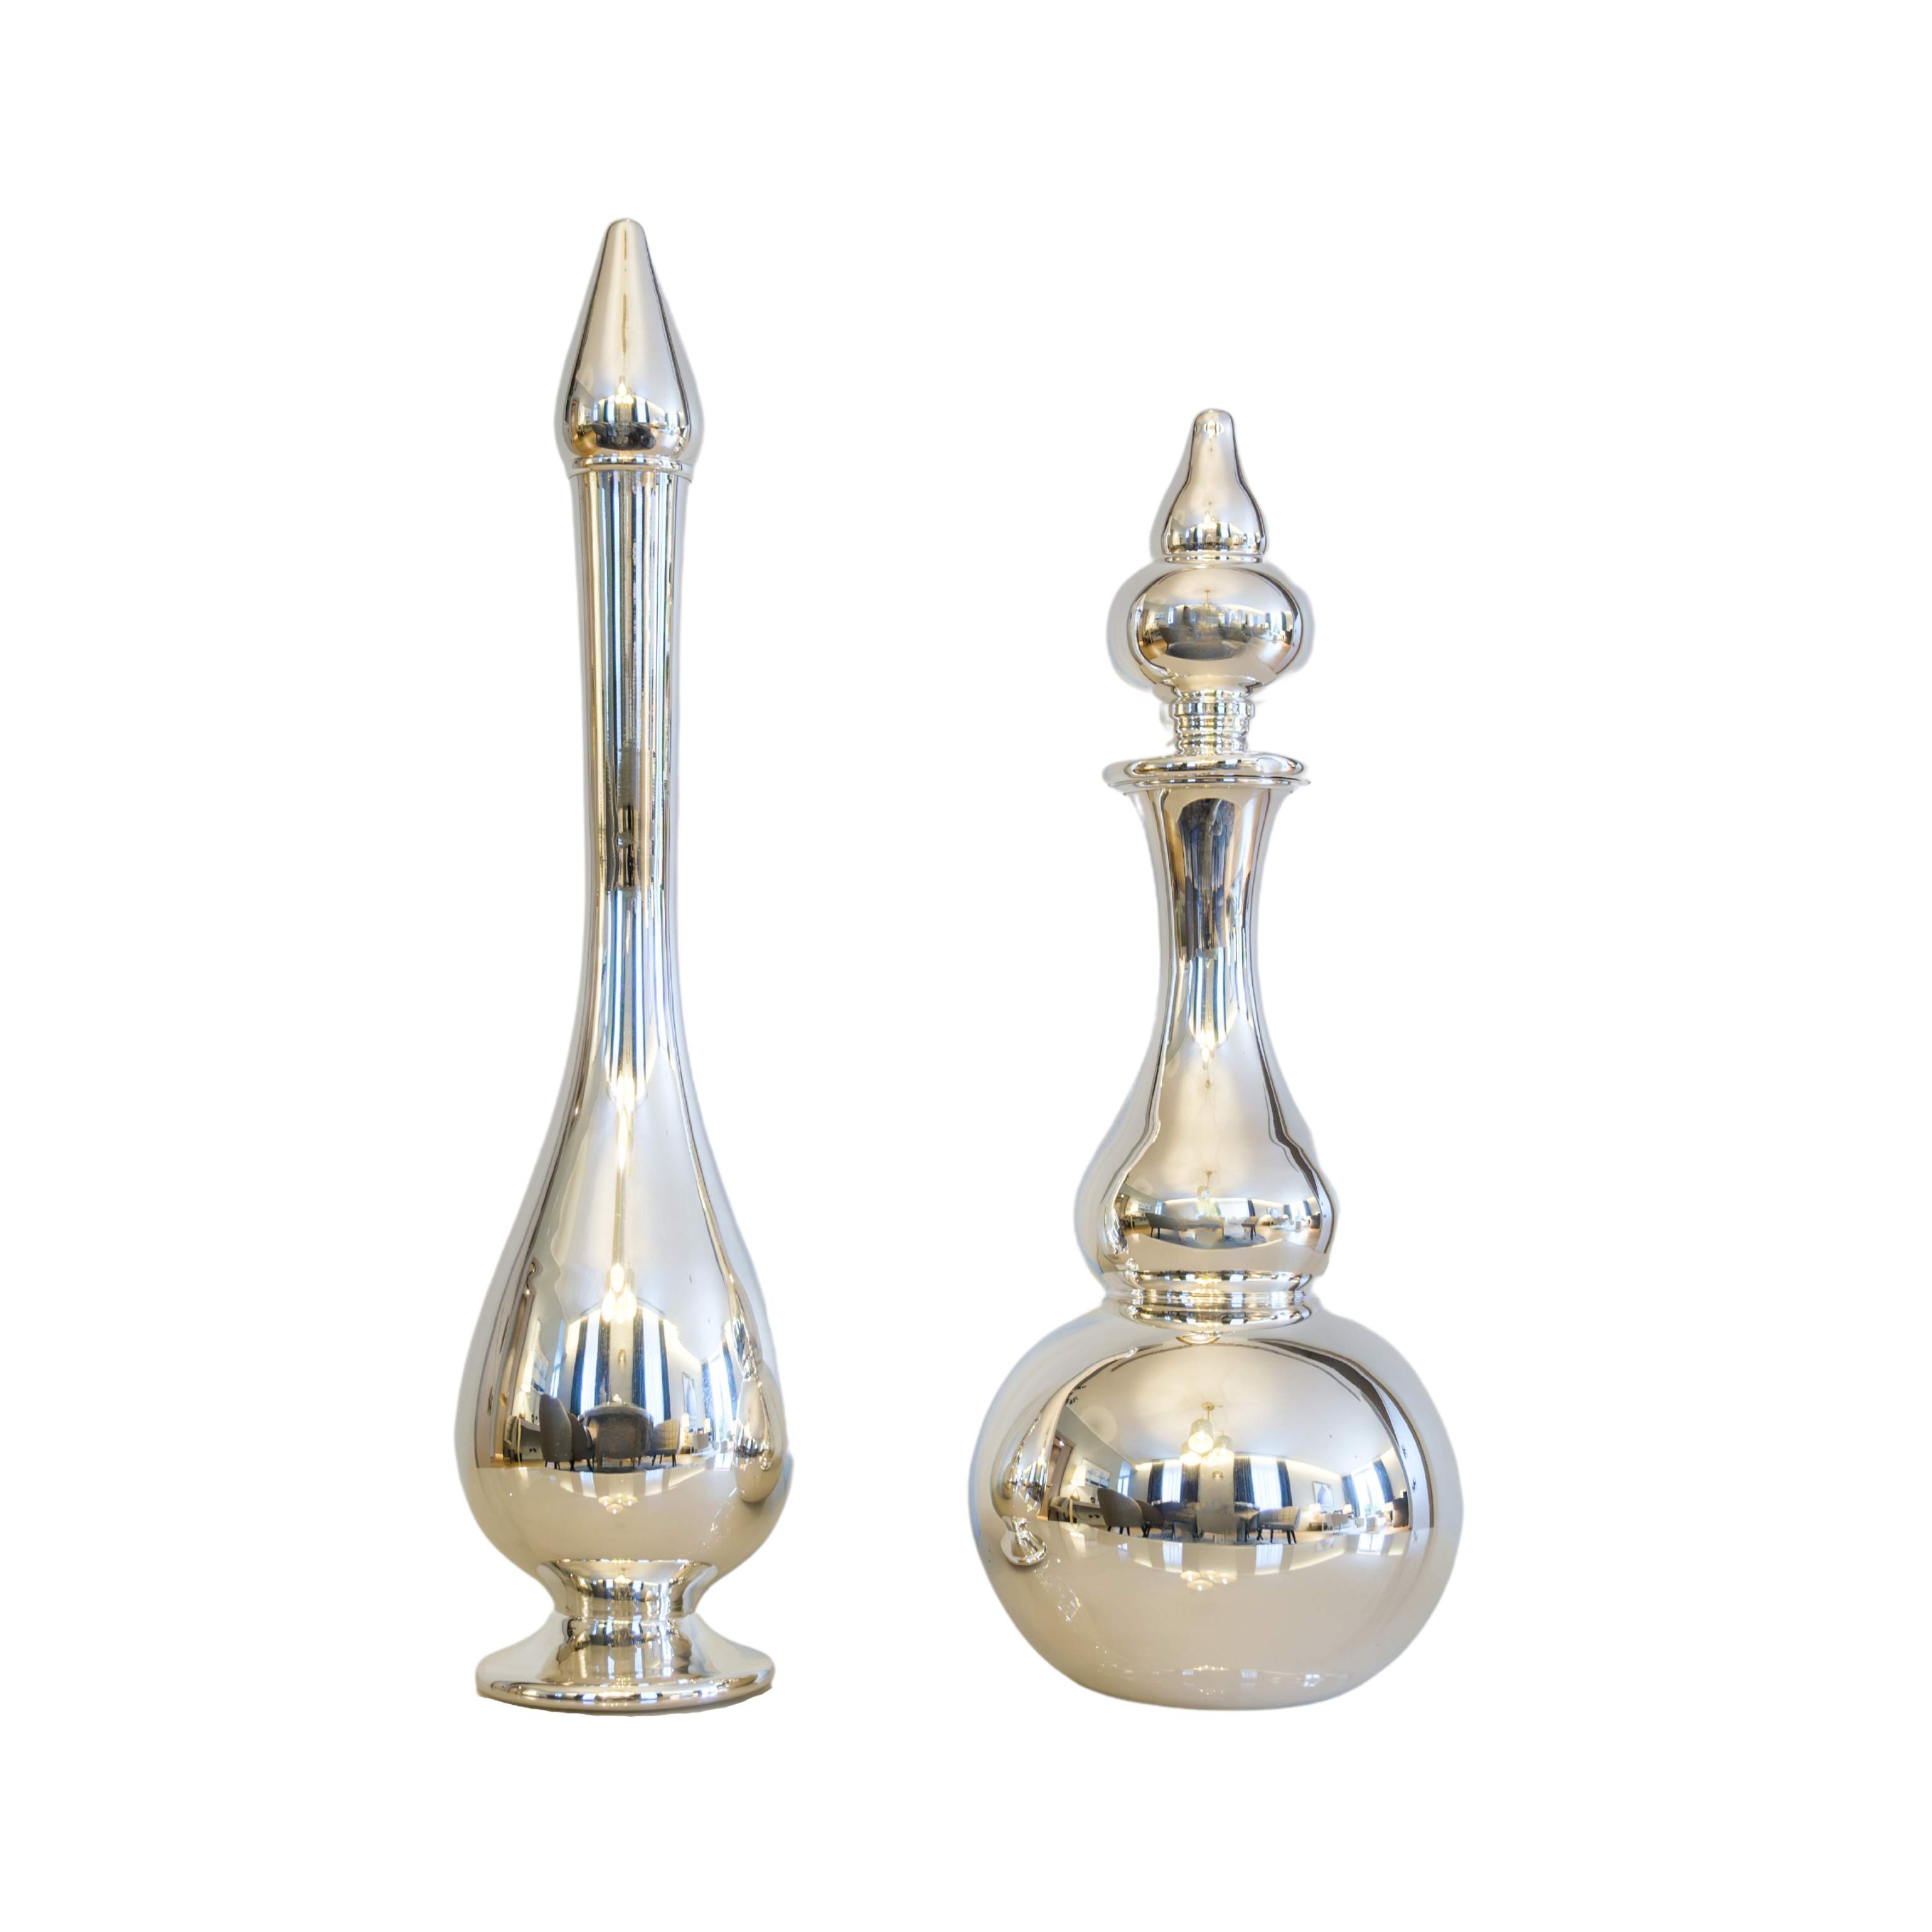 Set of two decorative bottles in silver plated